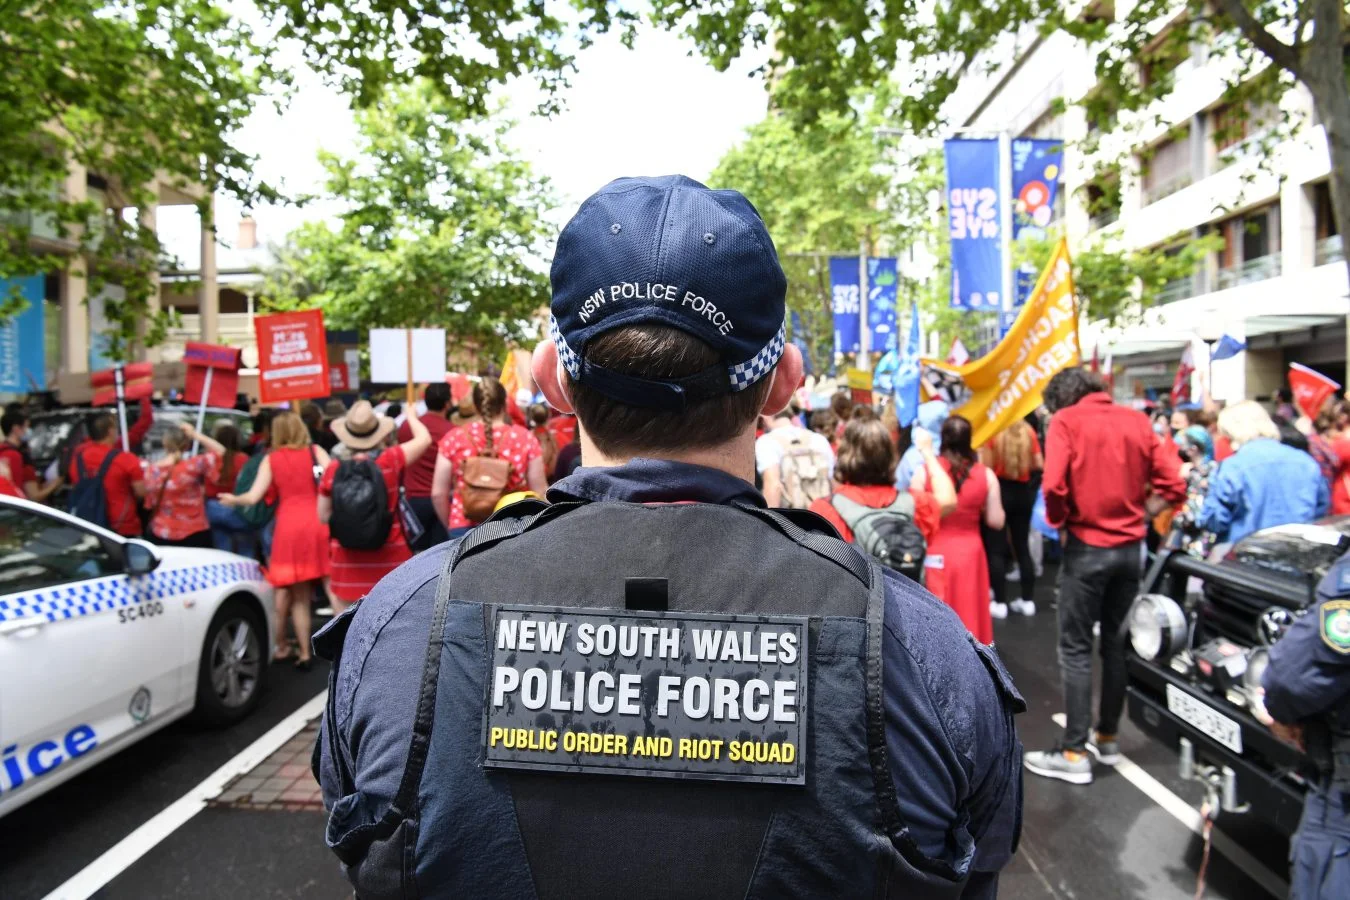 NSW Police Riot Officer stands behind a crowd of protester dressed in red and with banners